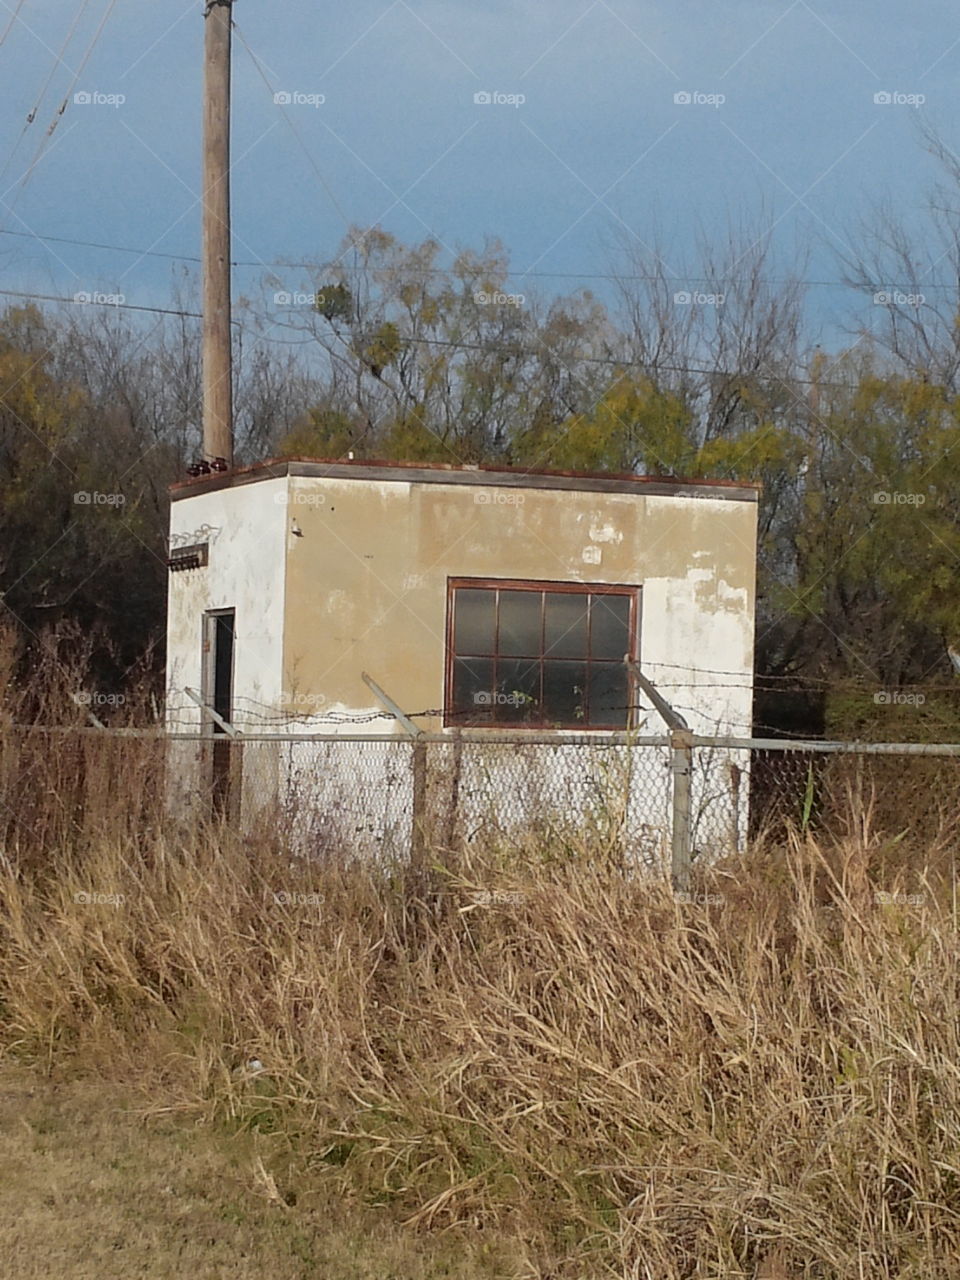 Abandoned electric company station...not really sure what it's called.